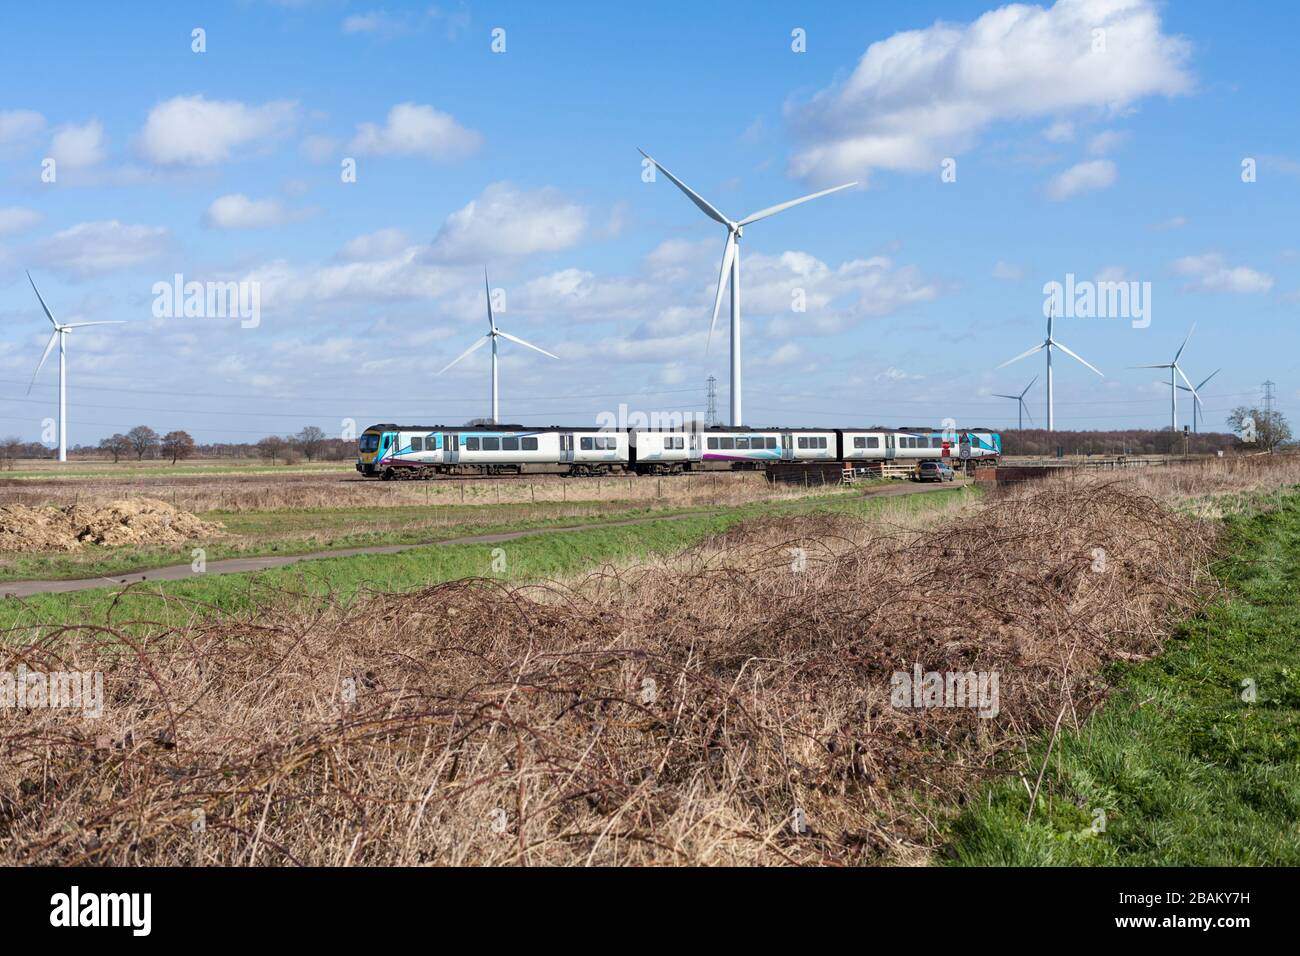 First Transpennine Express class 185 train 185143 passing Mauds Bridge, Yorkshire with wind turbines behind, Sustainable transport ? Stock Photo